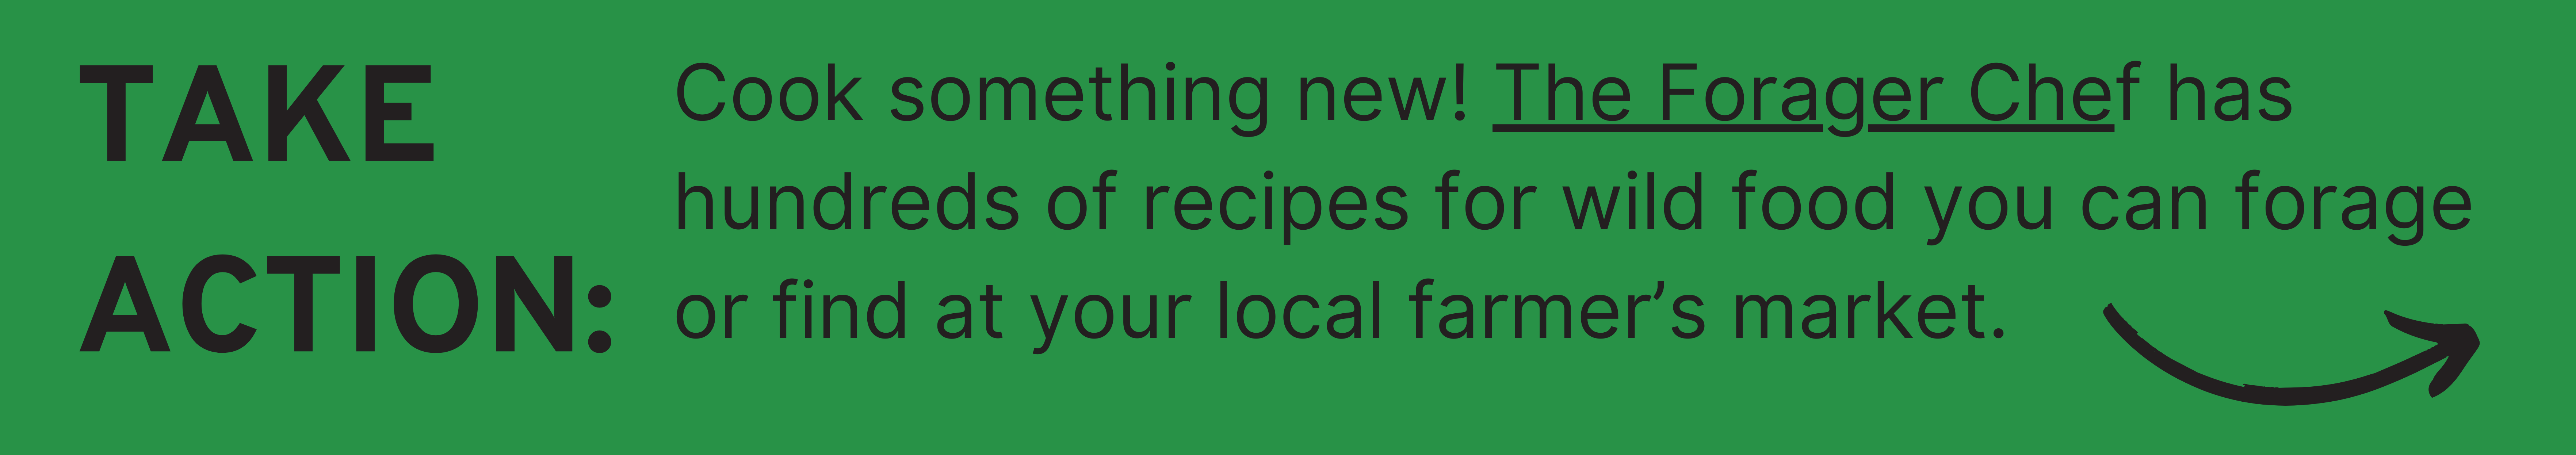 Take Action: Cook something new! The Forager Chef has hundreds of recipes for any wild food you can forage or find at your local farmer’s market.